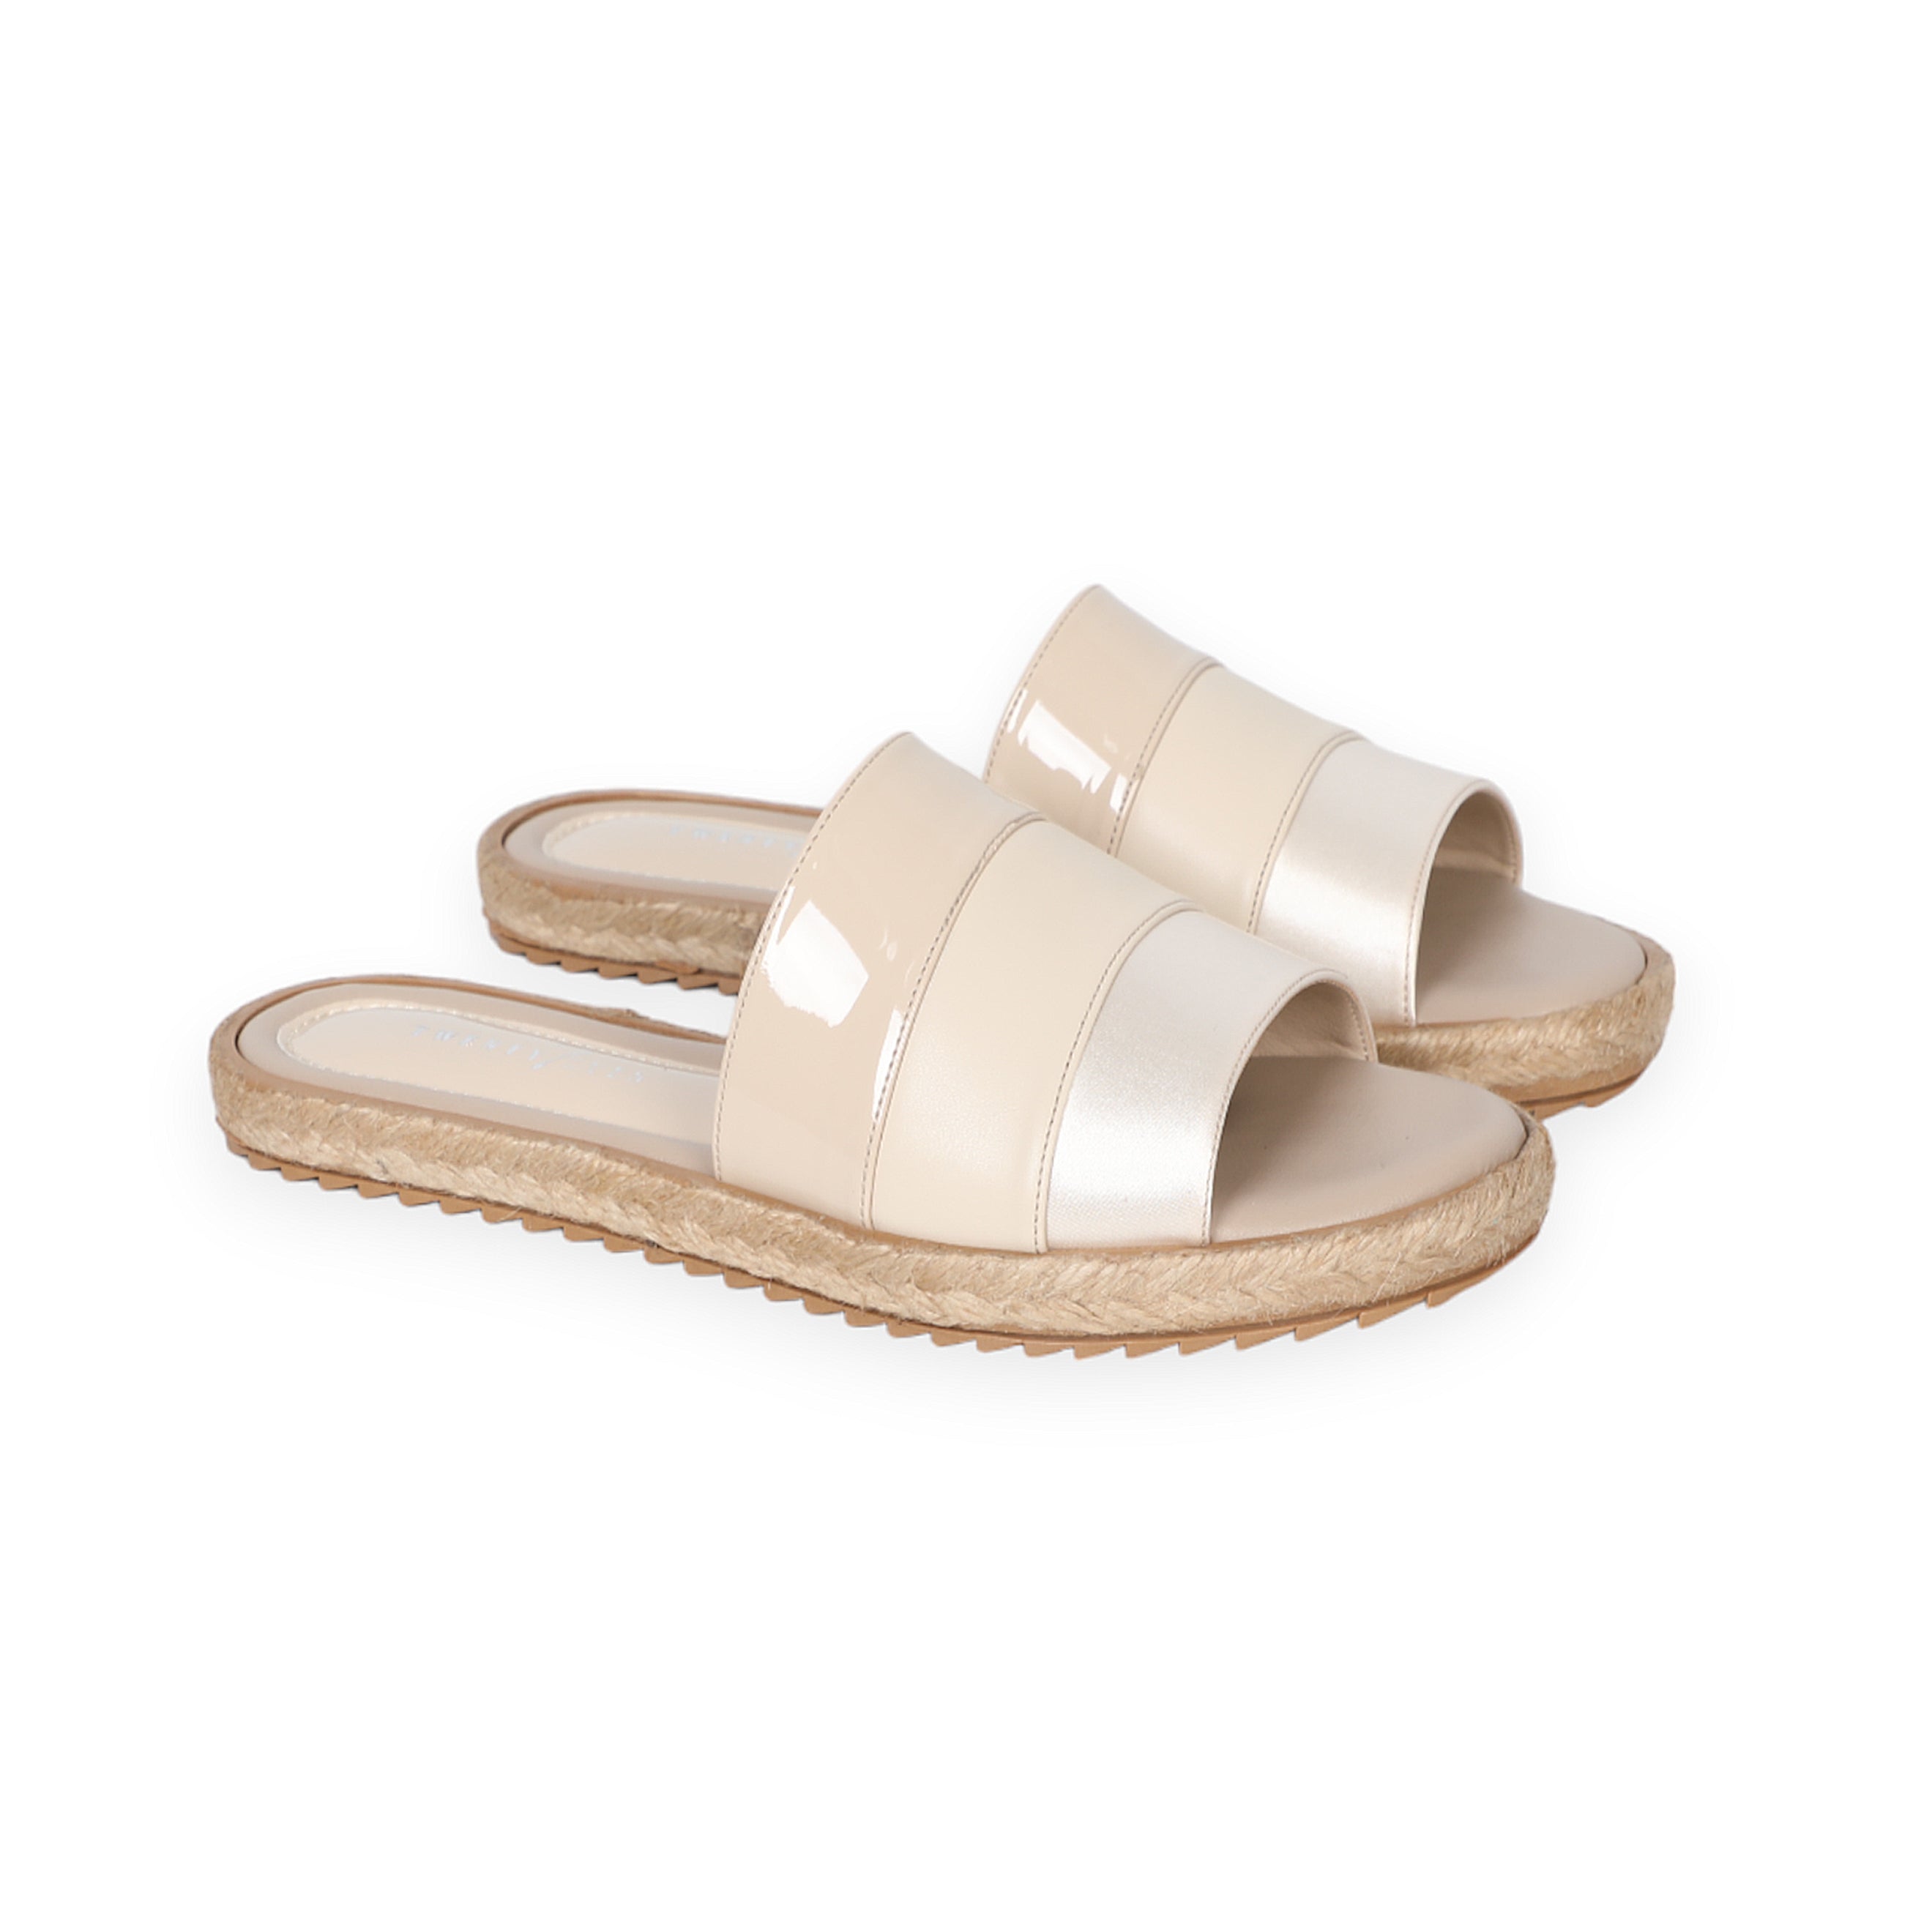 One Strap Beige Slipper With Small Insole